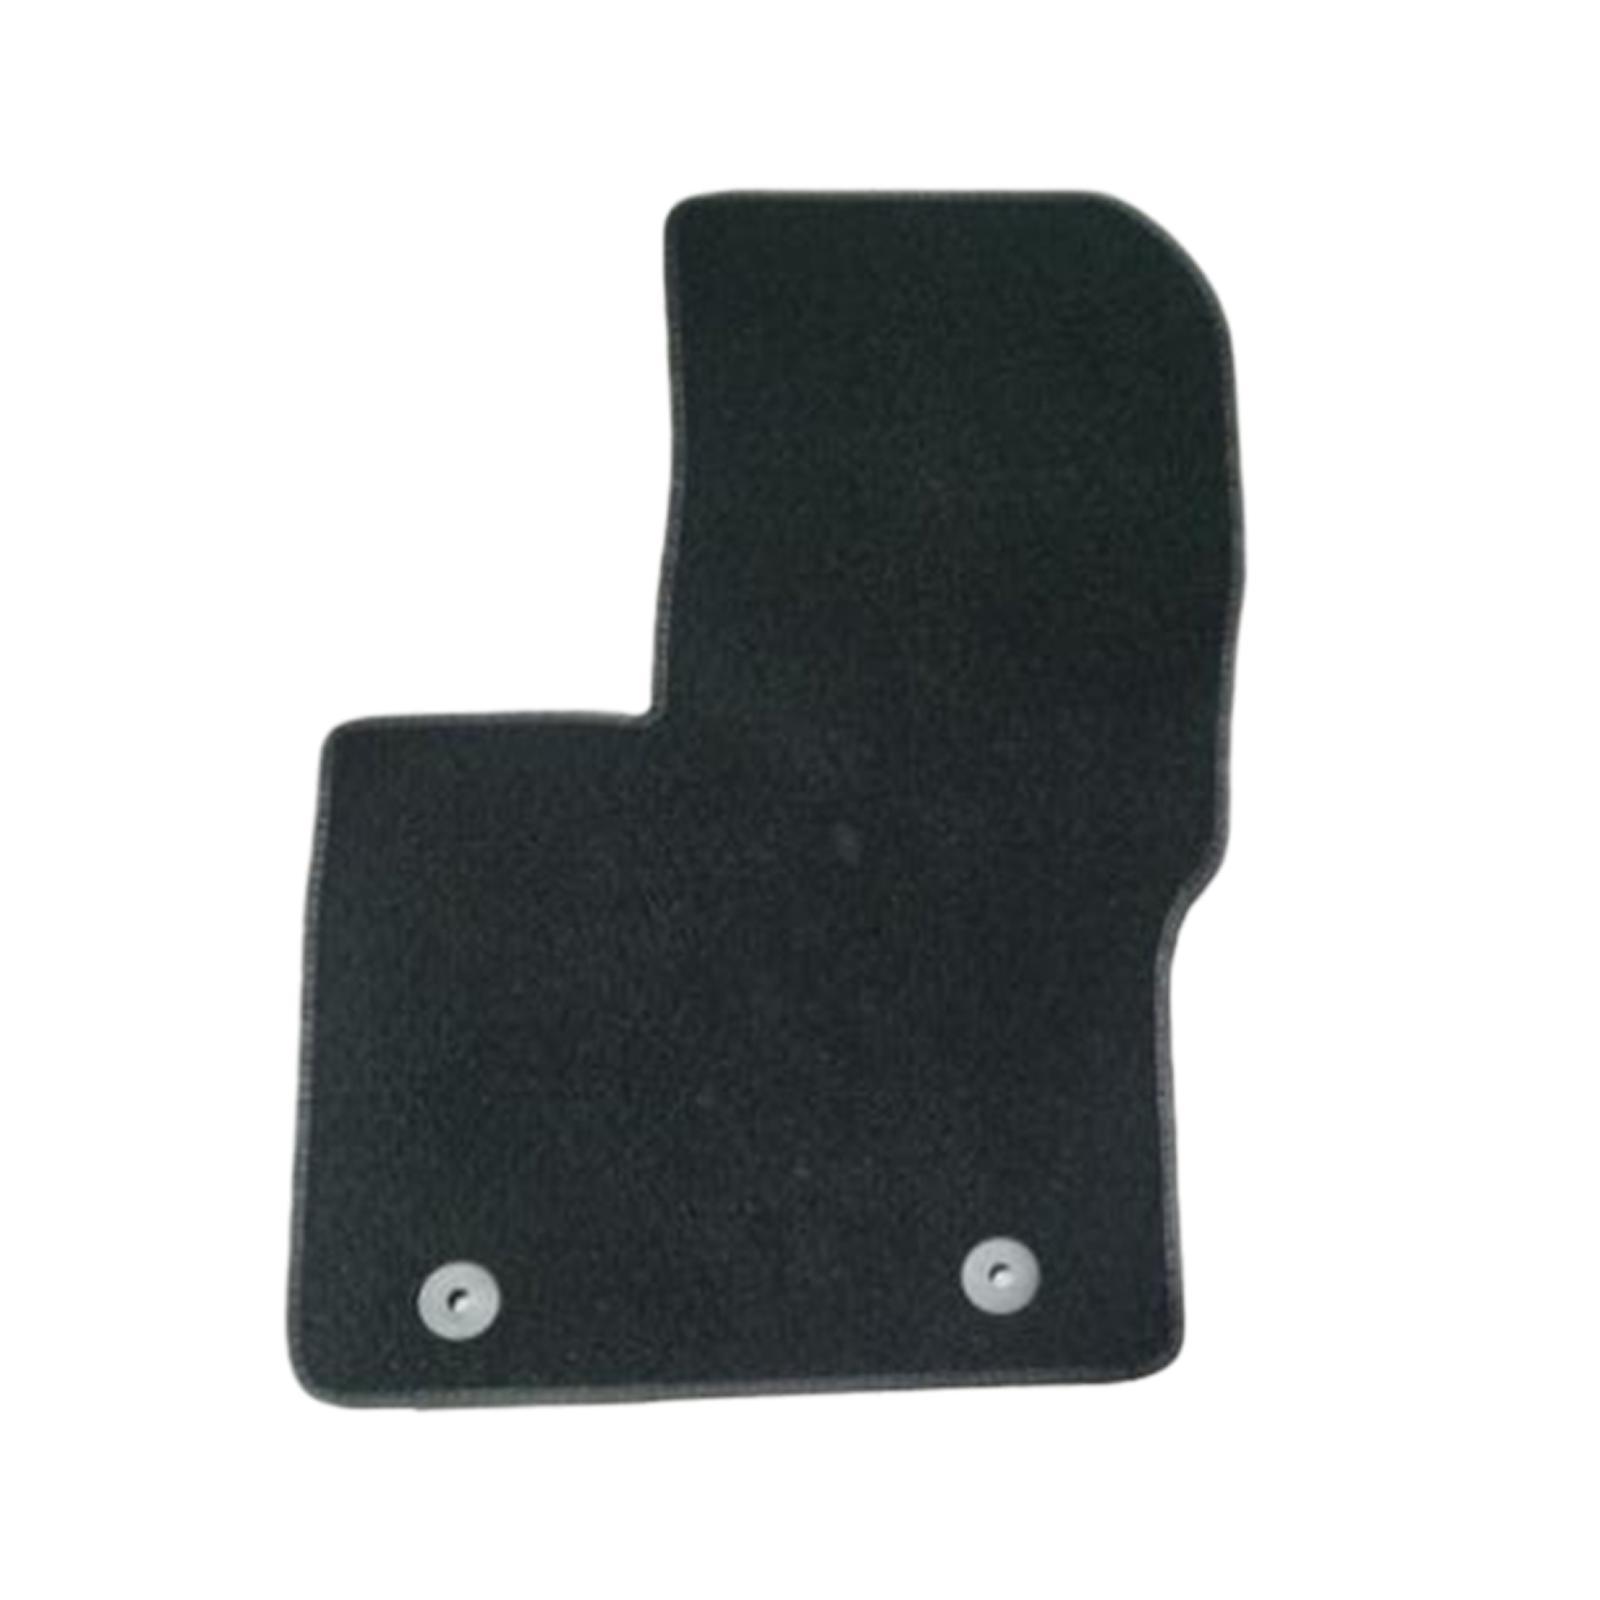 3 Pieces  Mats Black for Byd Yuan Pro High Quality